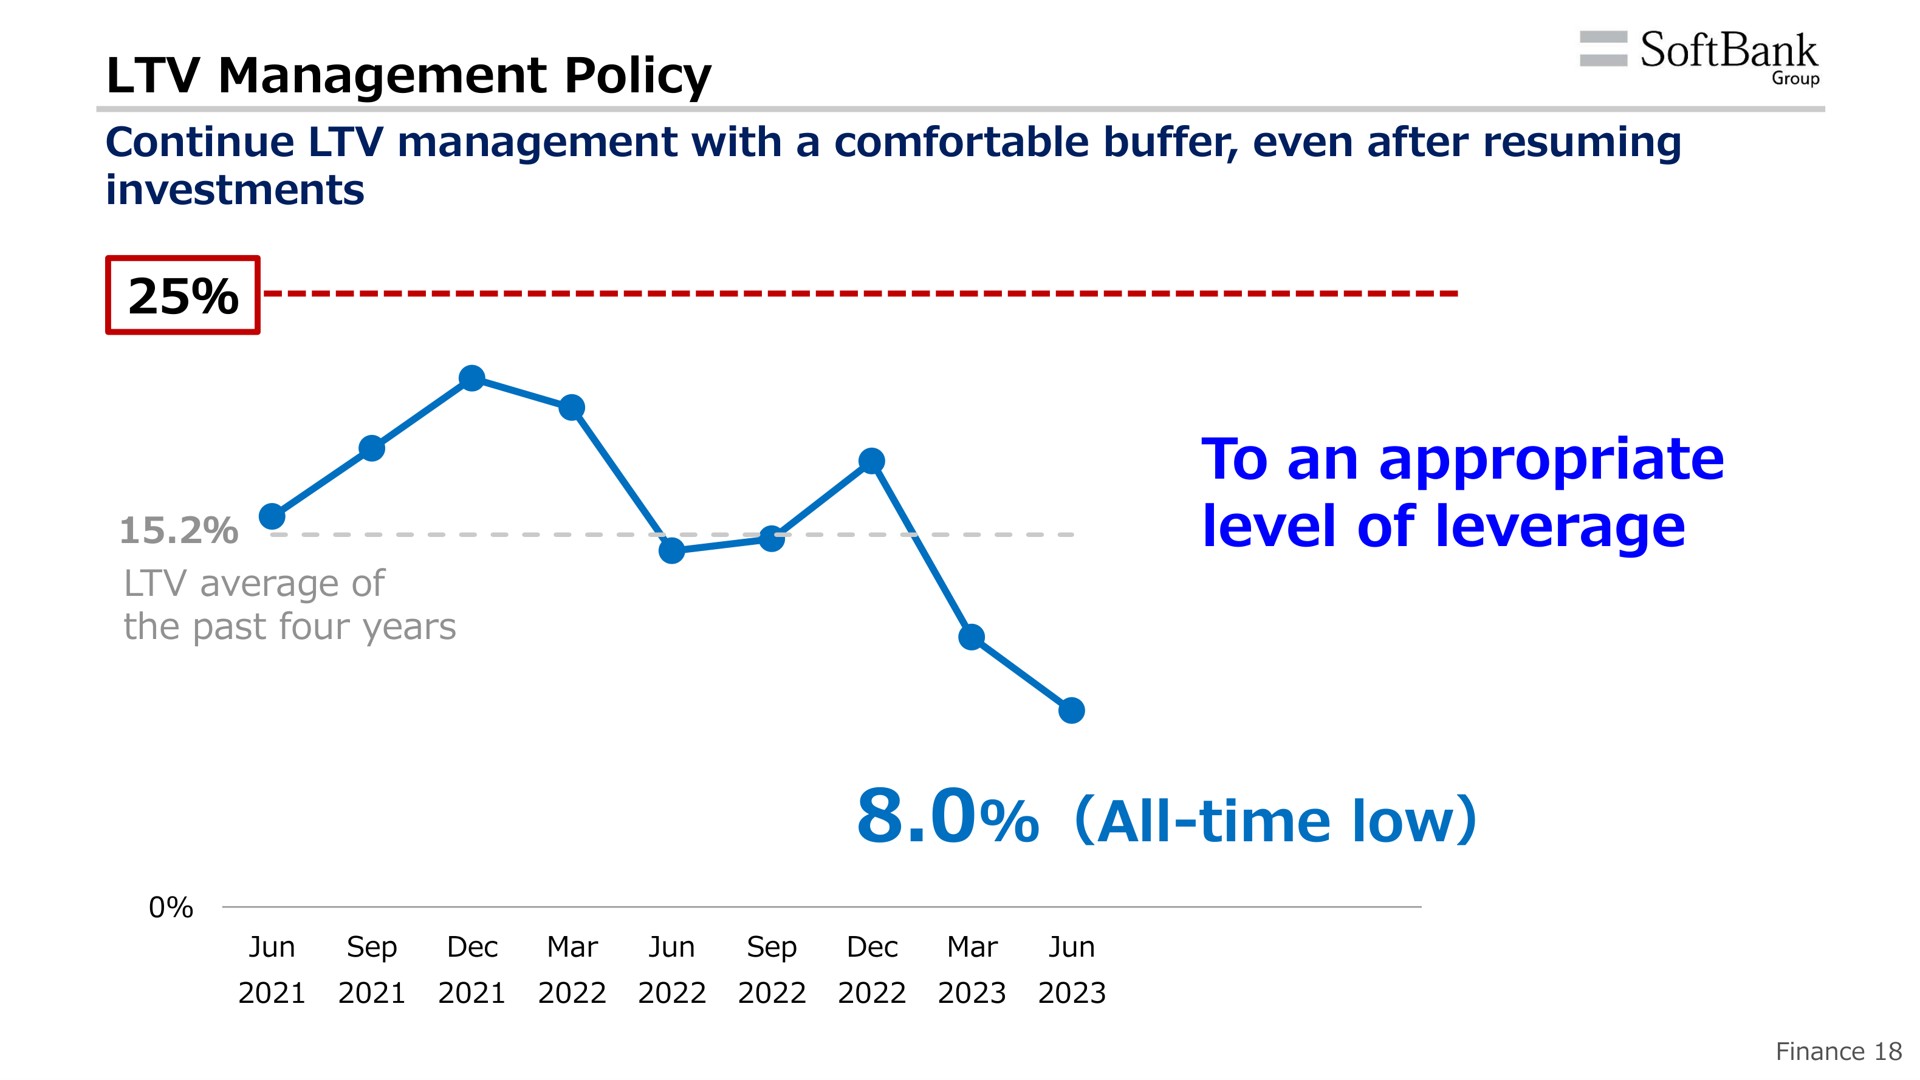 management policy to an appropriate level of leverage all time low | SoftBank